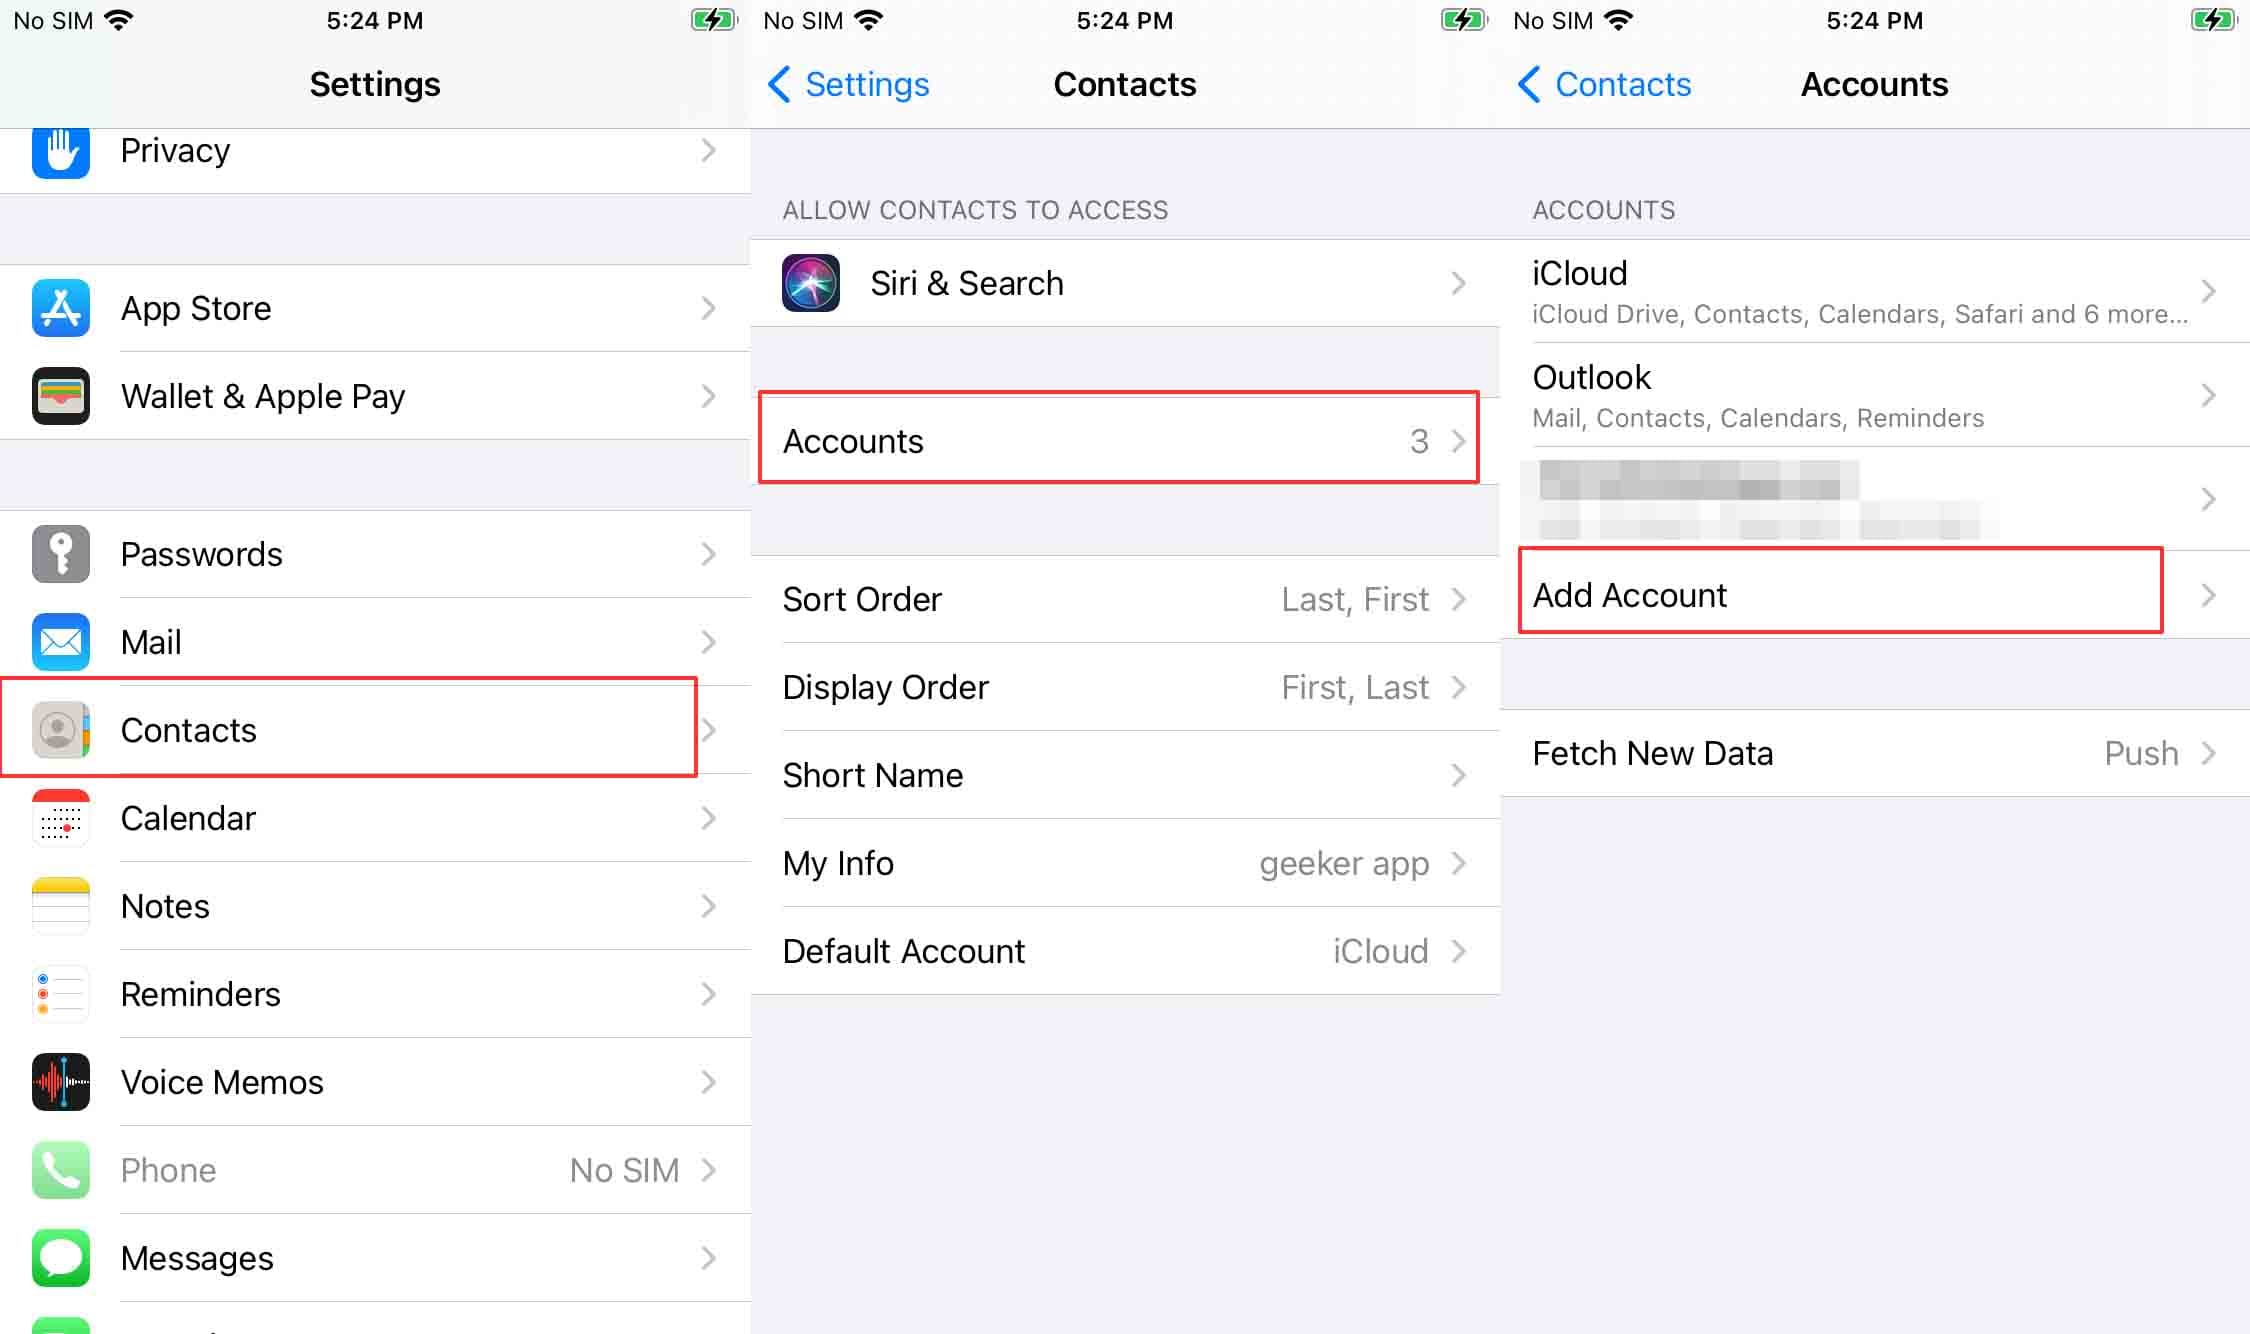 recovering lost iPhone contacts after deleting email account